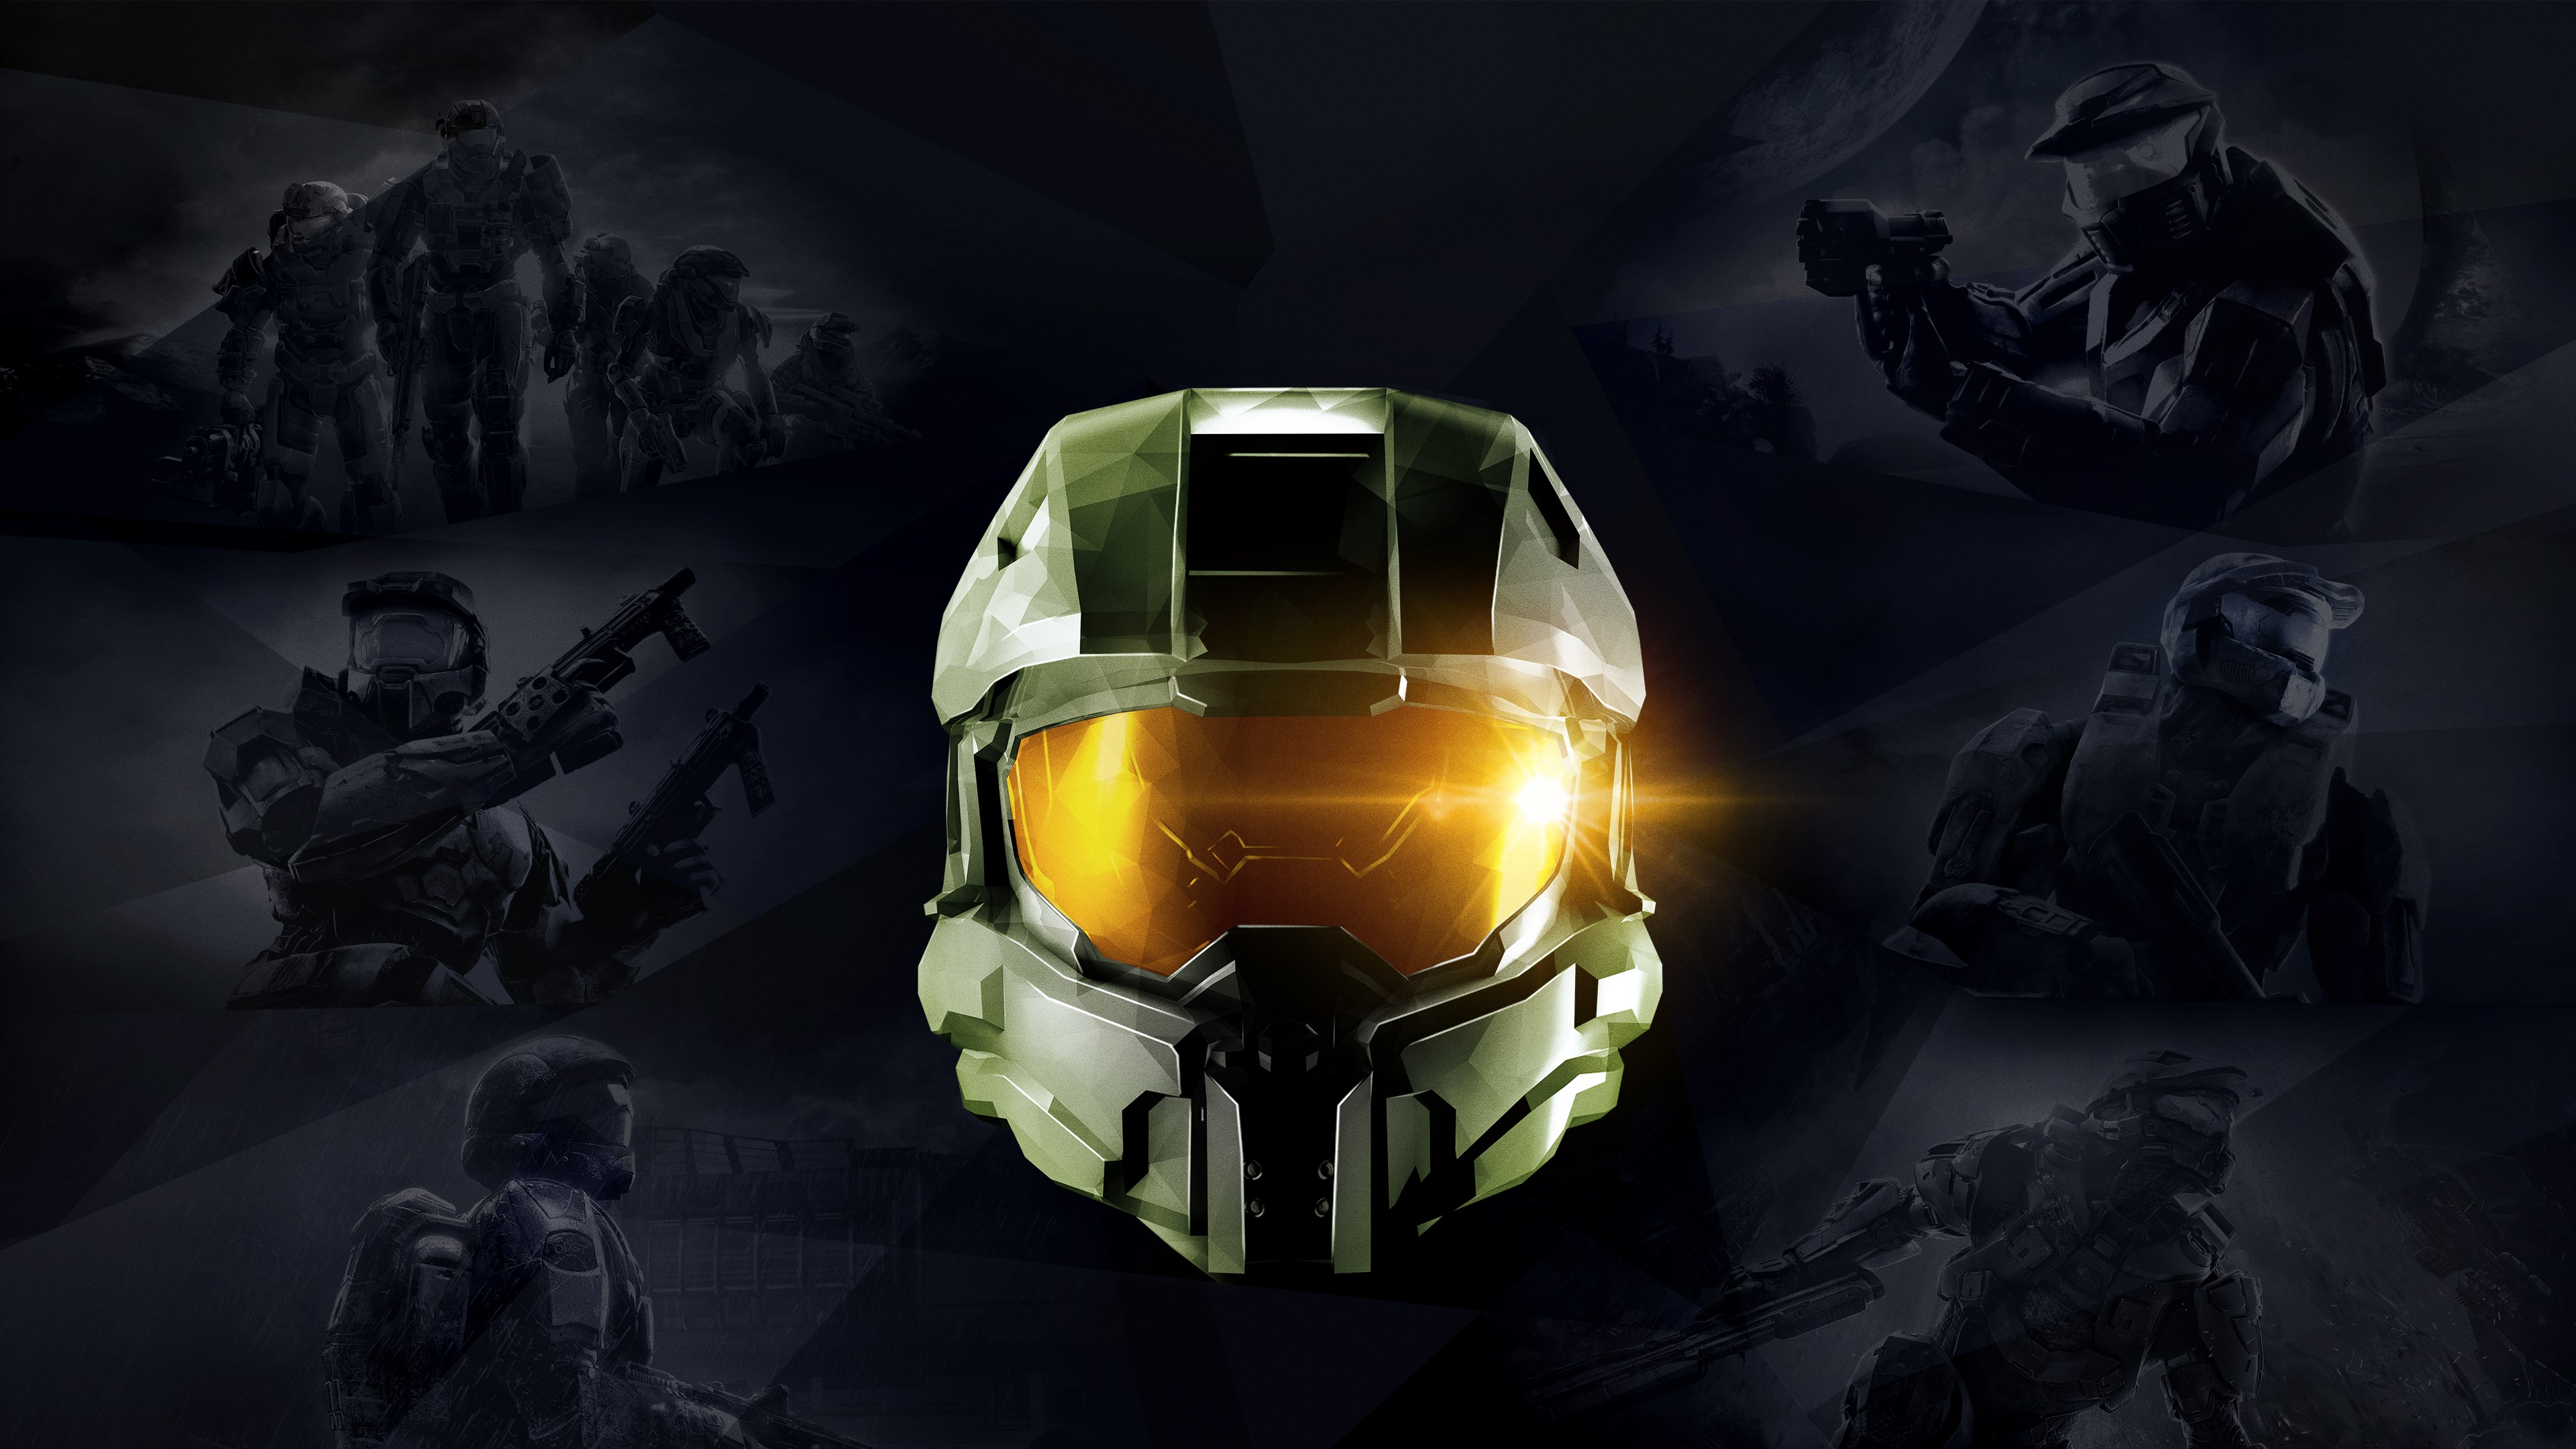 Buy Halo: The Master Chief Collection - Microsoft Store en-IN